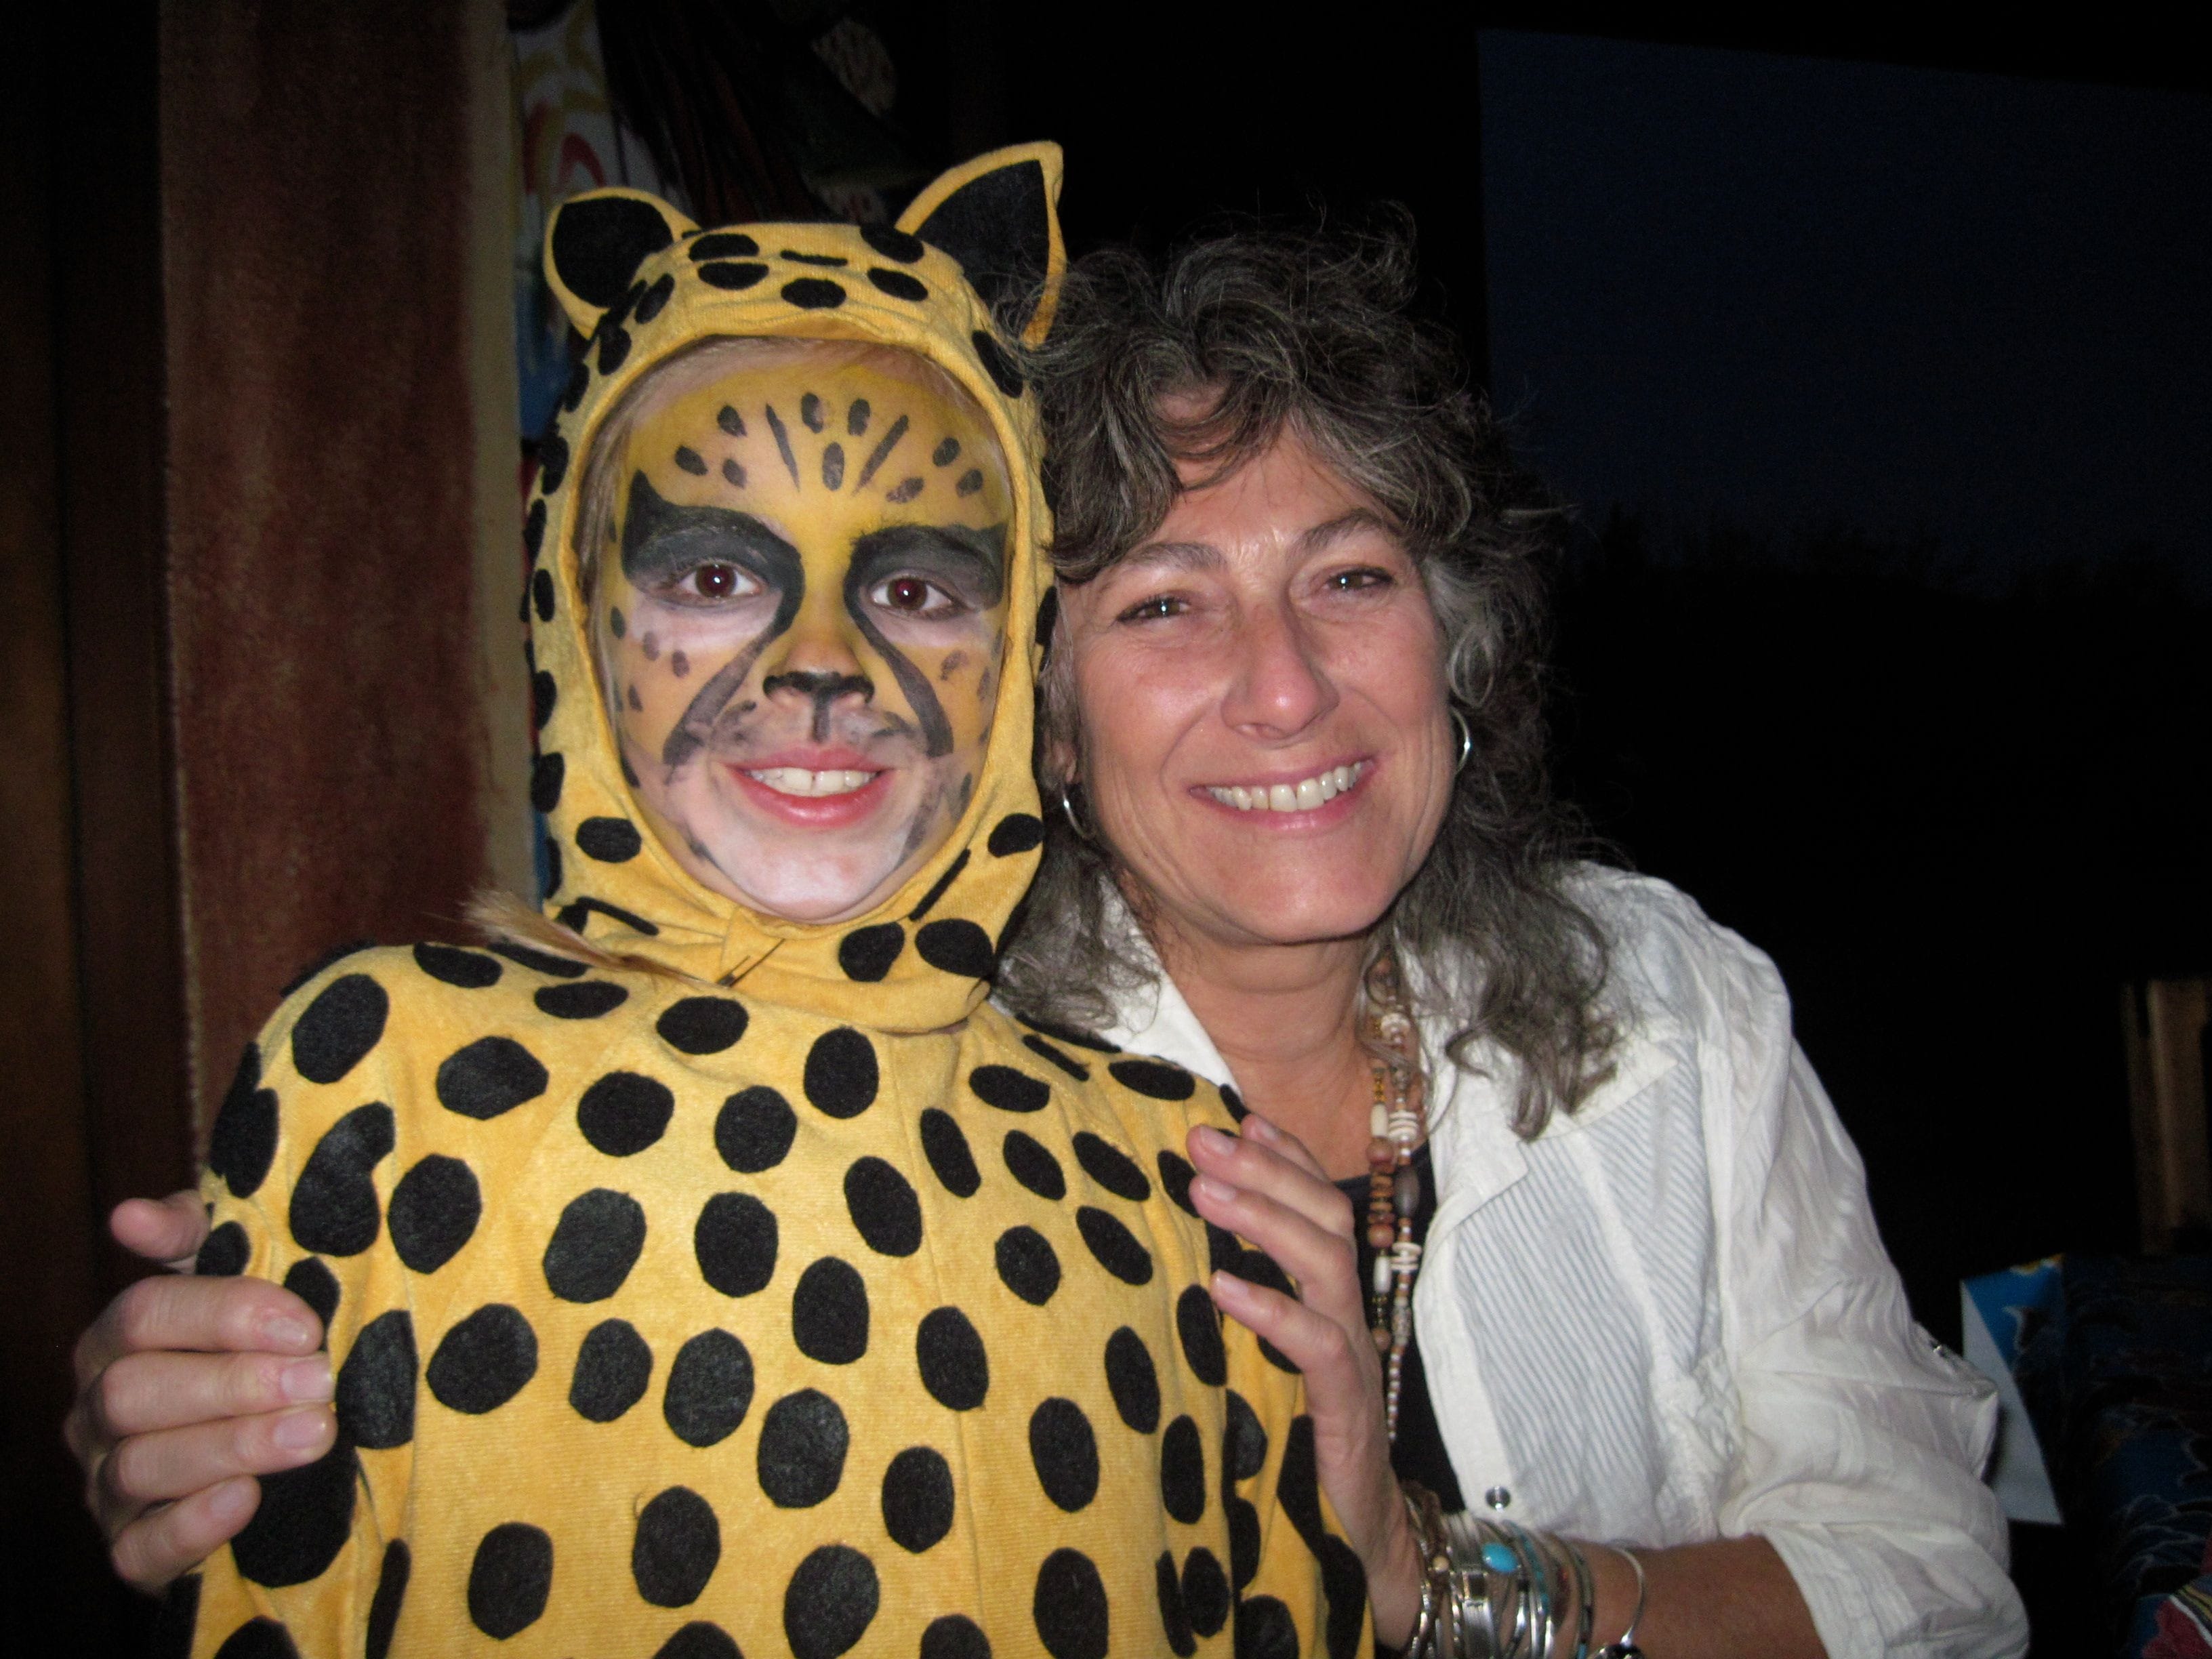 Dress up like a cheetah! Lots of spots with a long tail and painted face. Dr. Laurie Marker and Cheetah Kid Kristen.